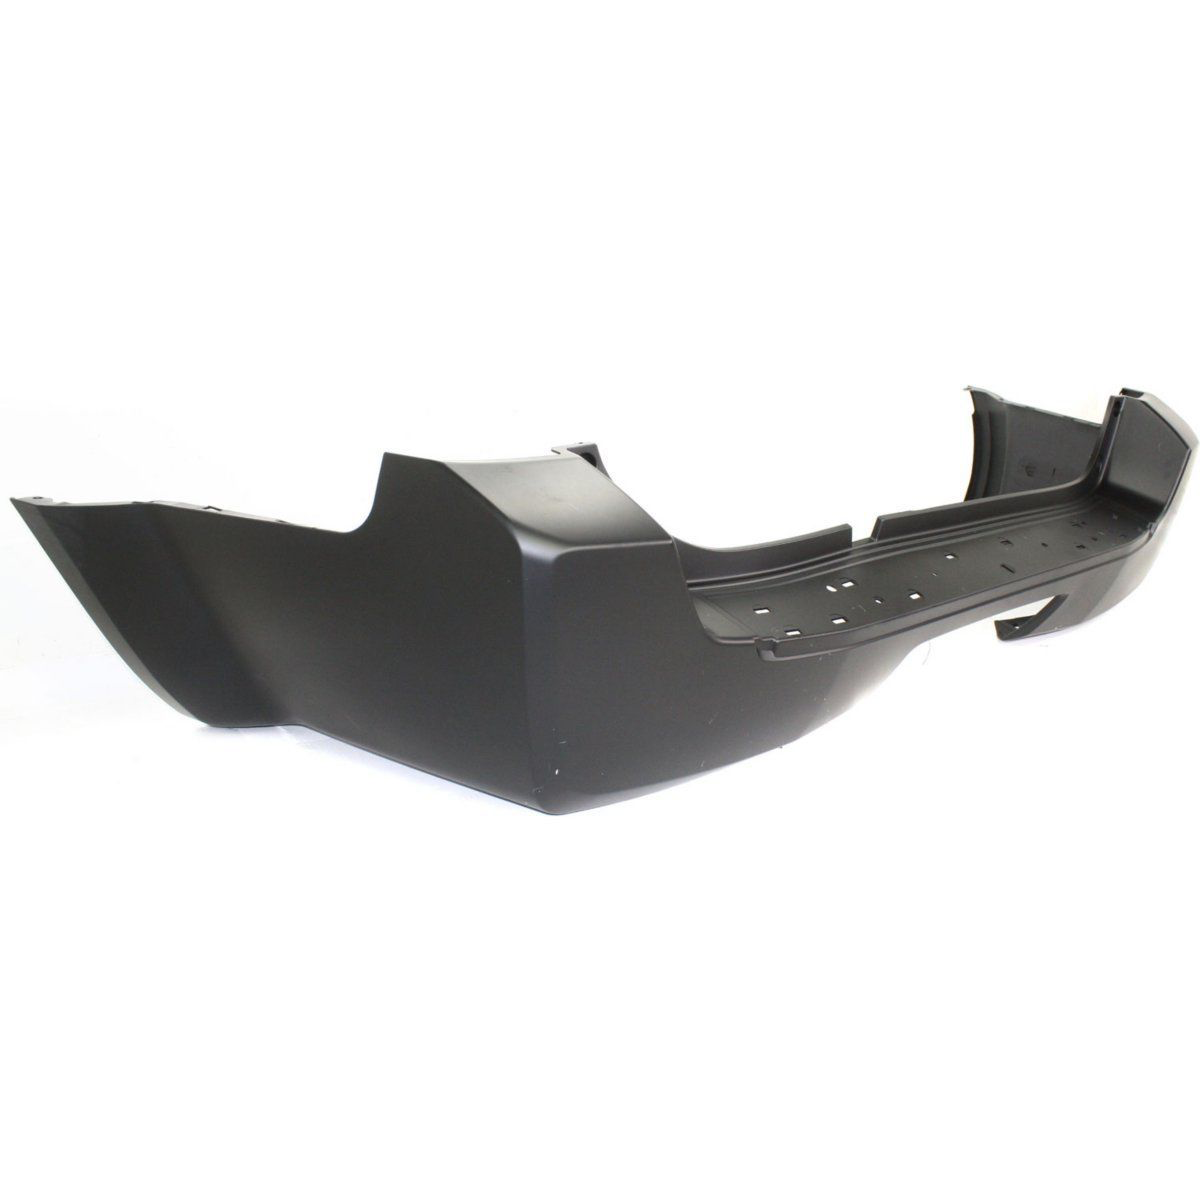 2005-2007 NISSAN PATHFINDER Rear Bumper Cover From 4-06 Painted to Match